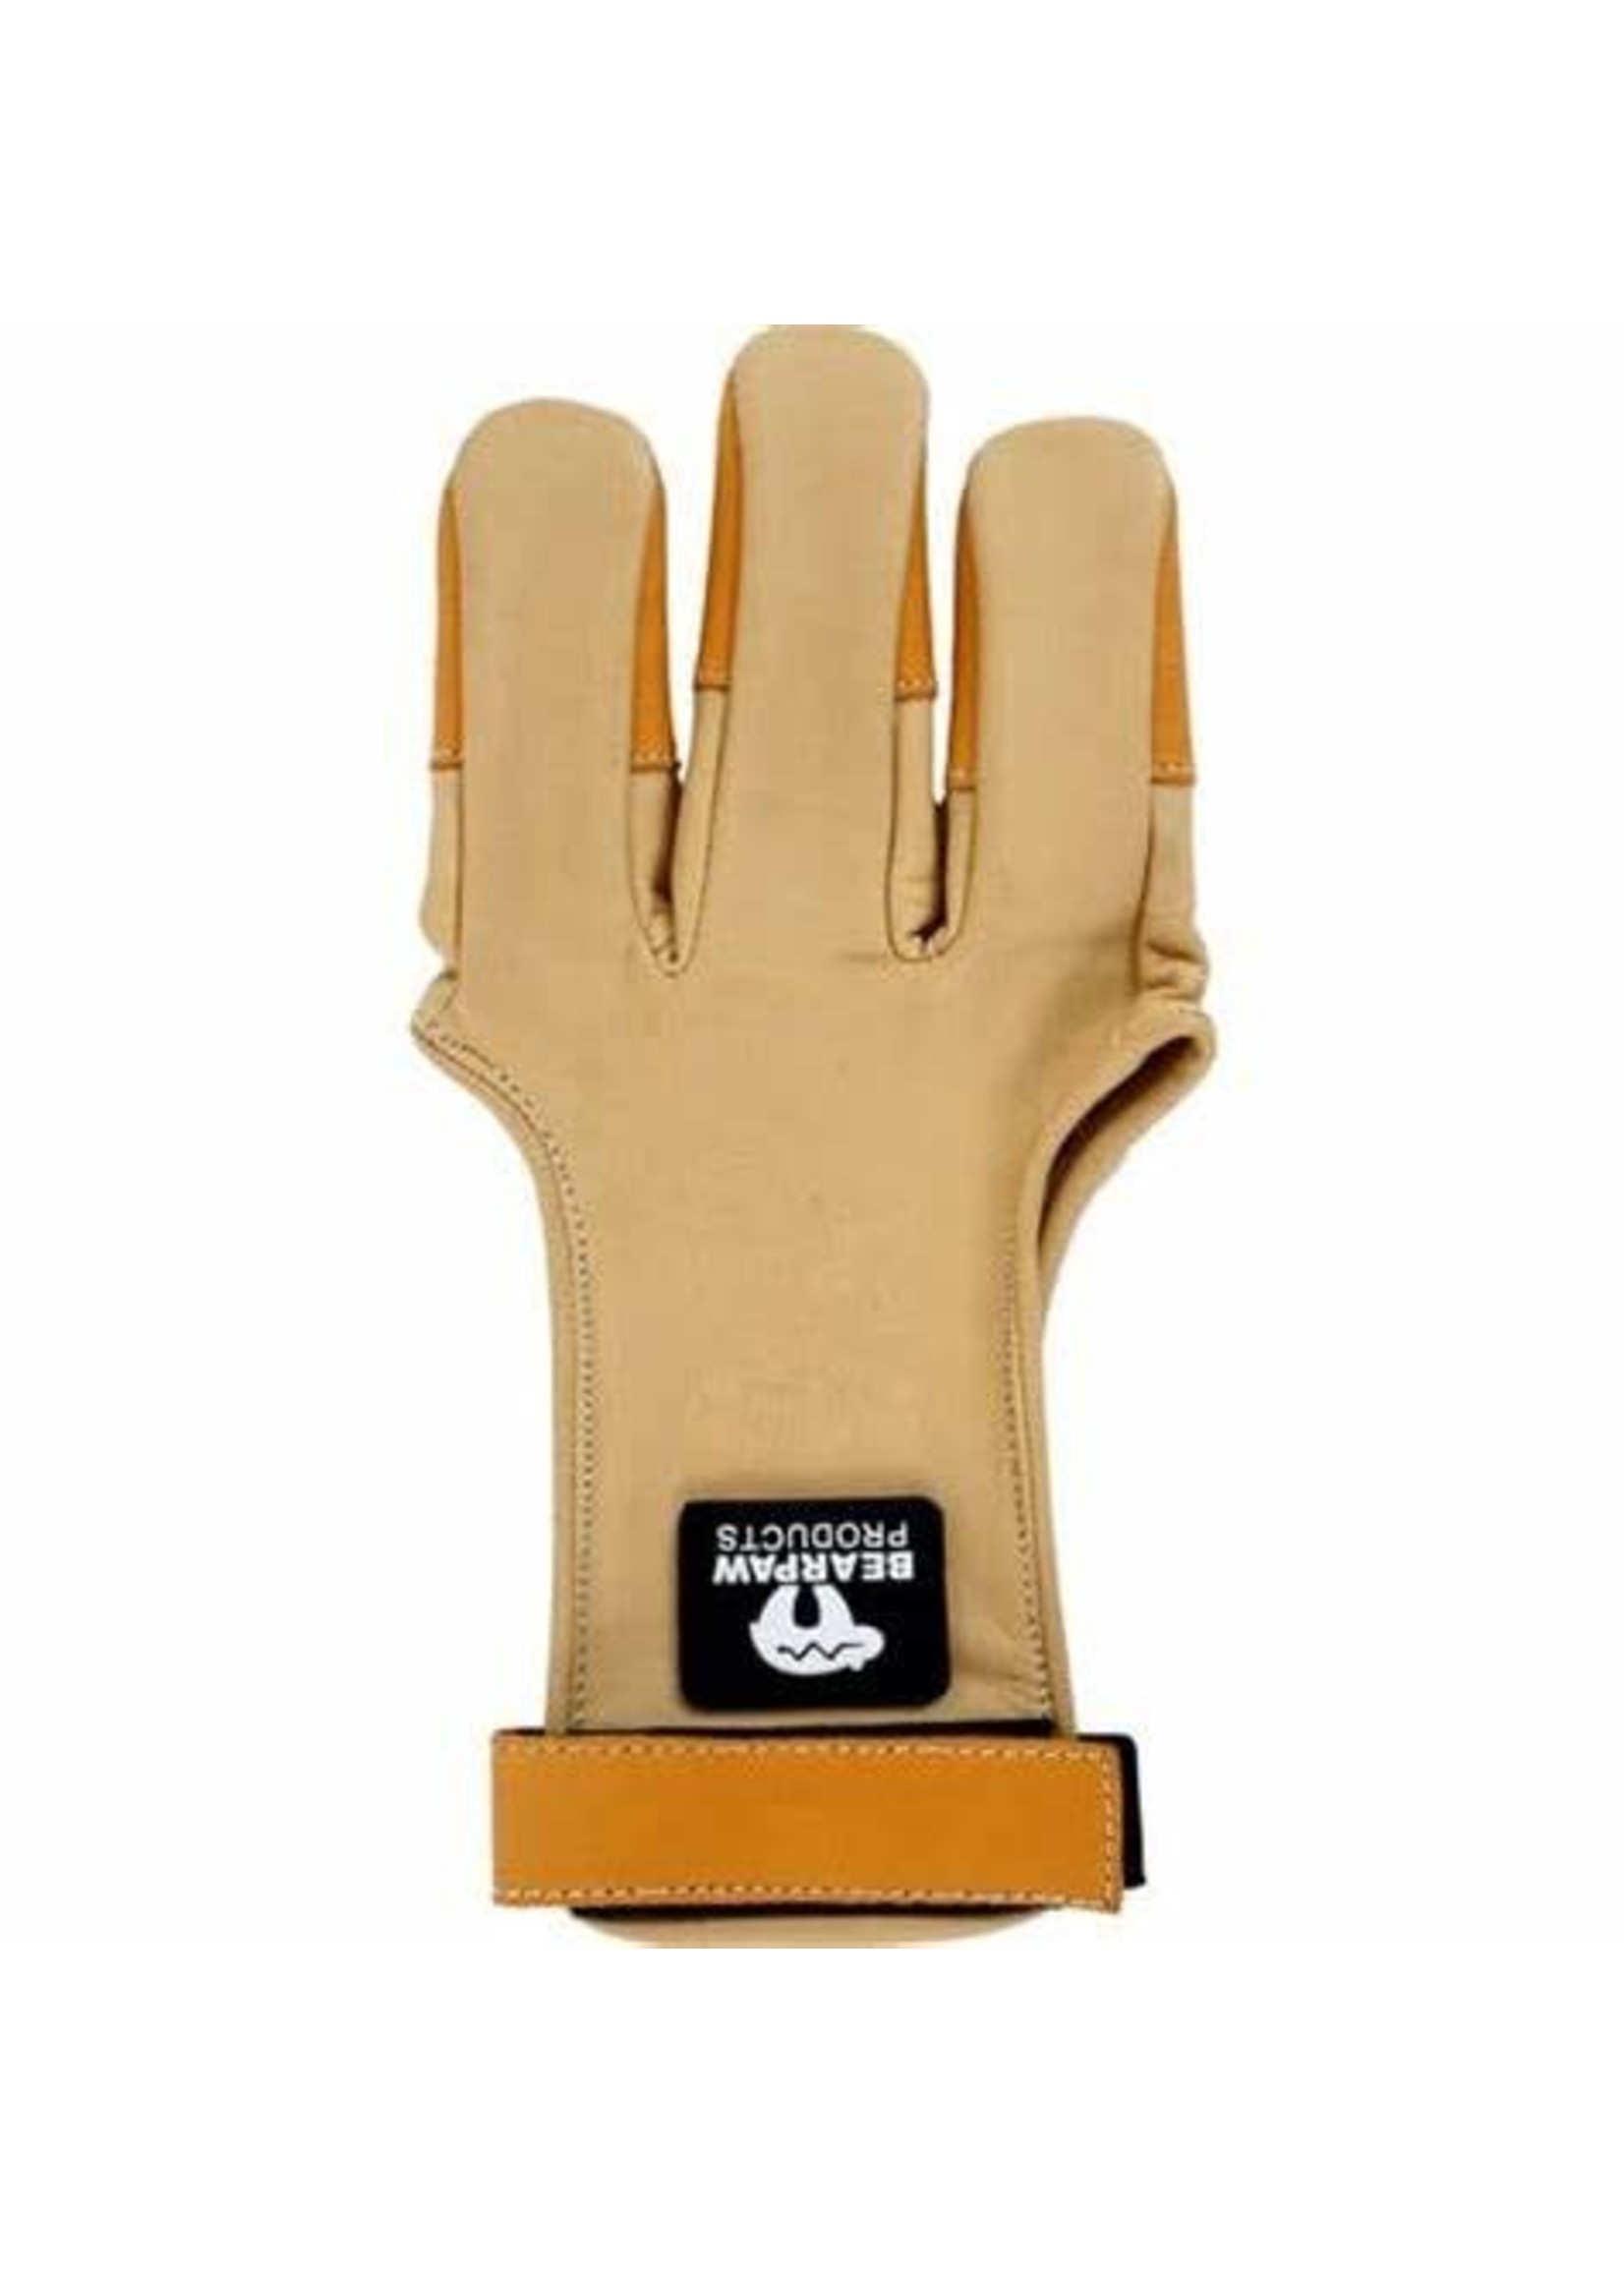 Bear Leather Shooting Glove – Lancaster Archery Supply